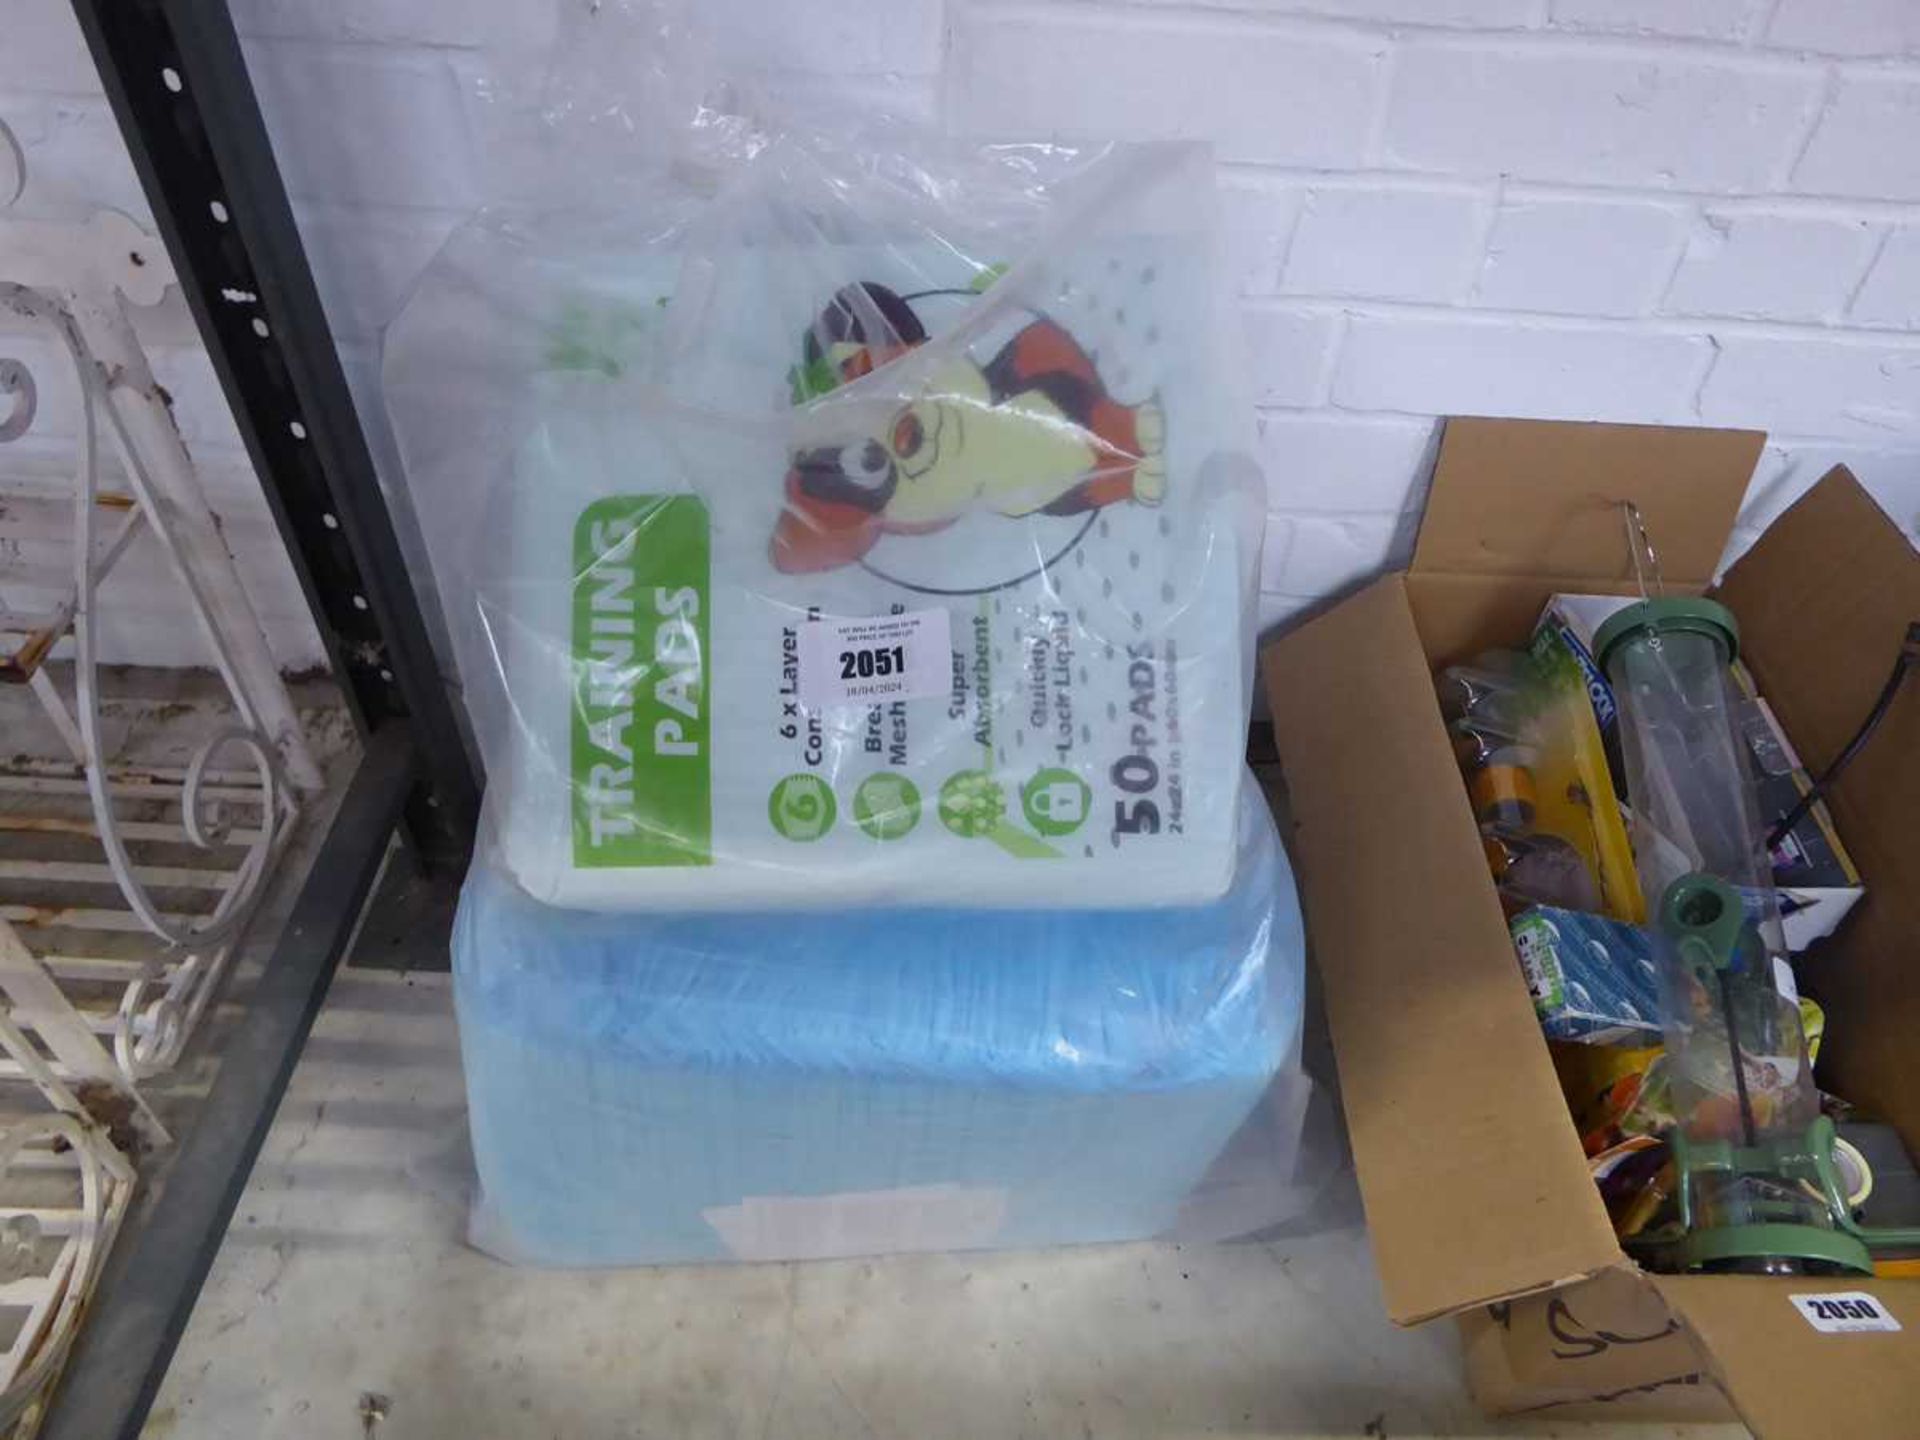 Bag of puppy training mats and pads